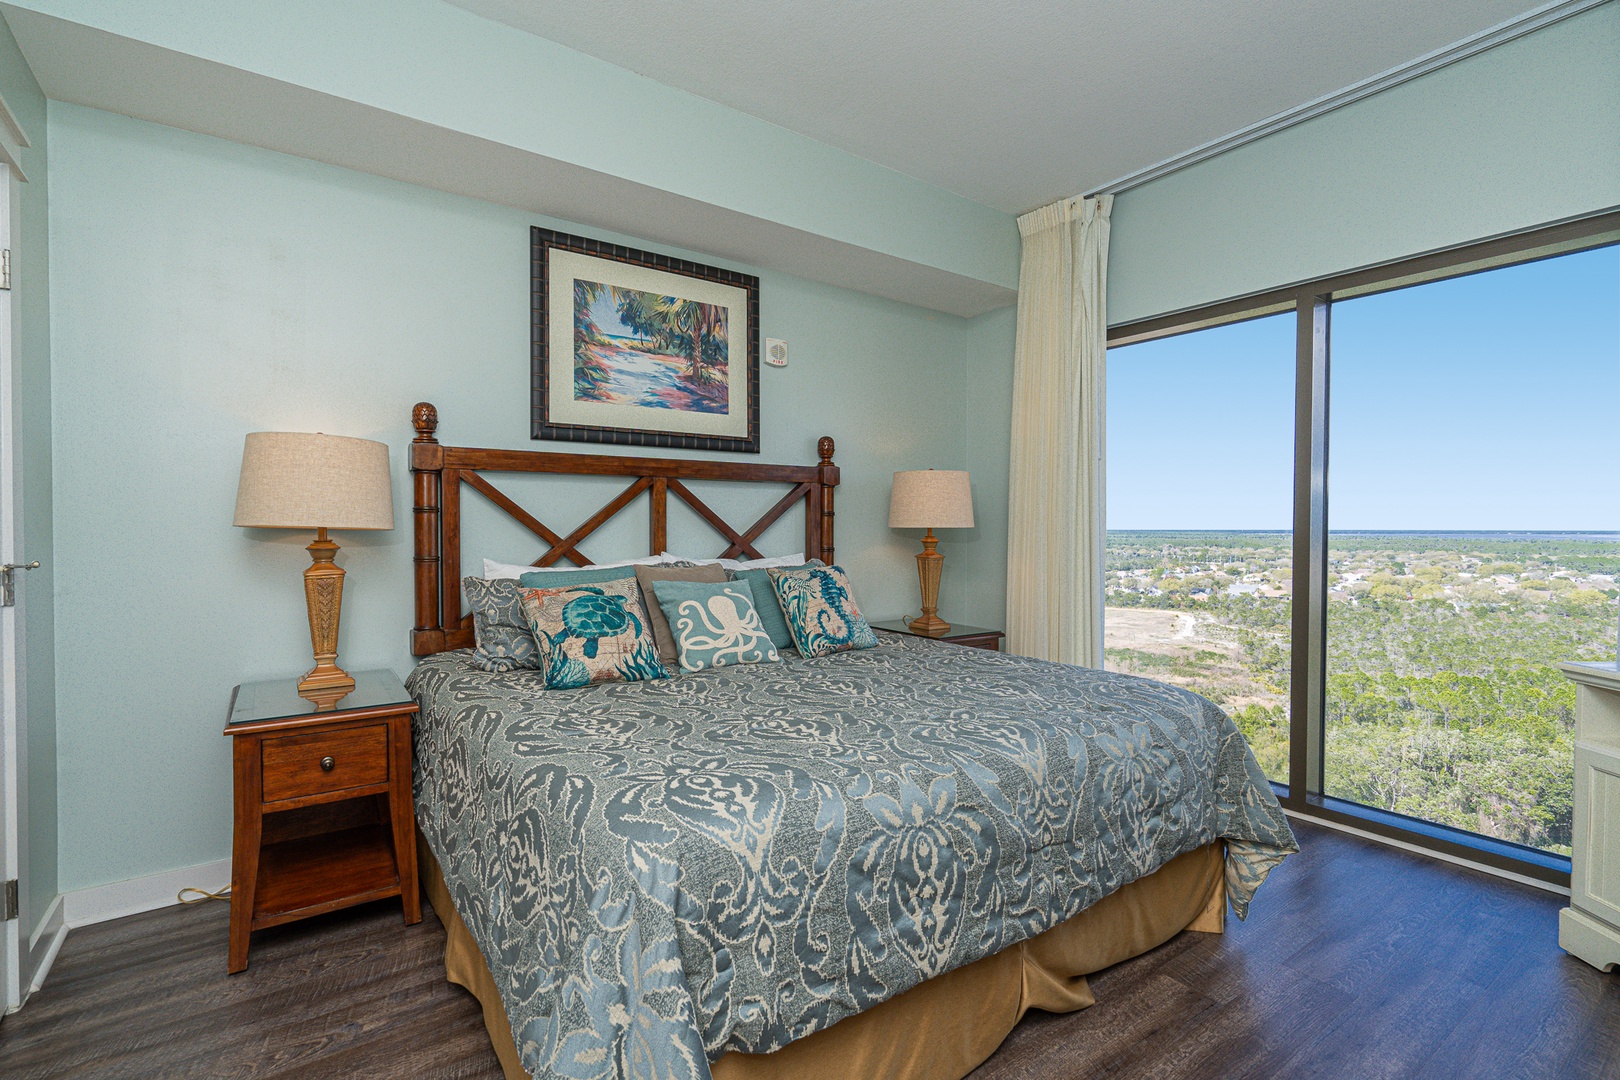 The 2nd bedroom retreat showcases a plush king bed, TV, & gorgeous views